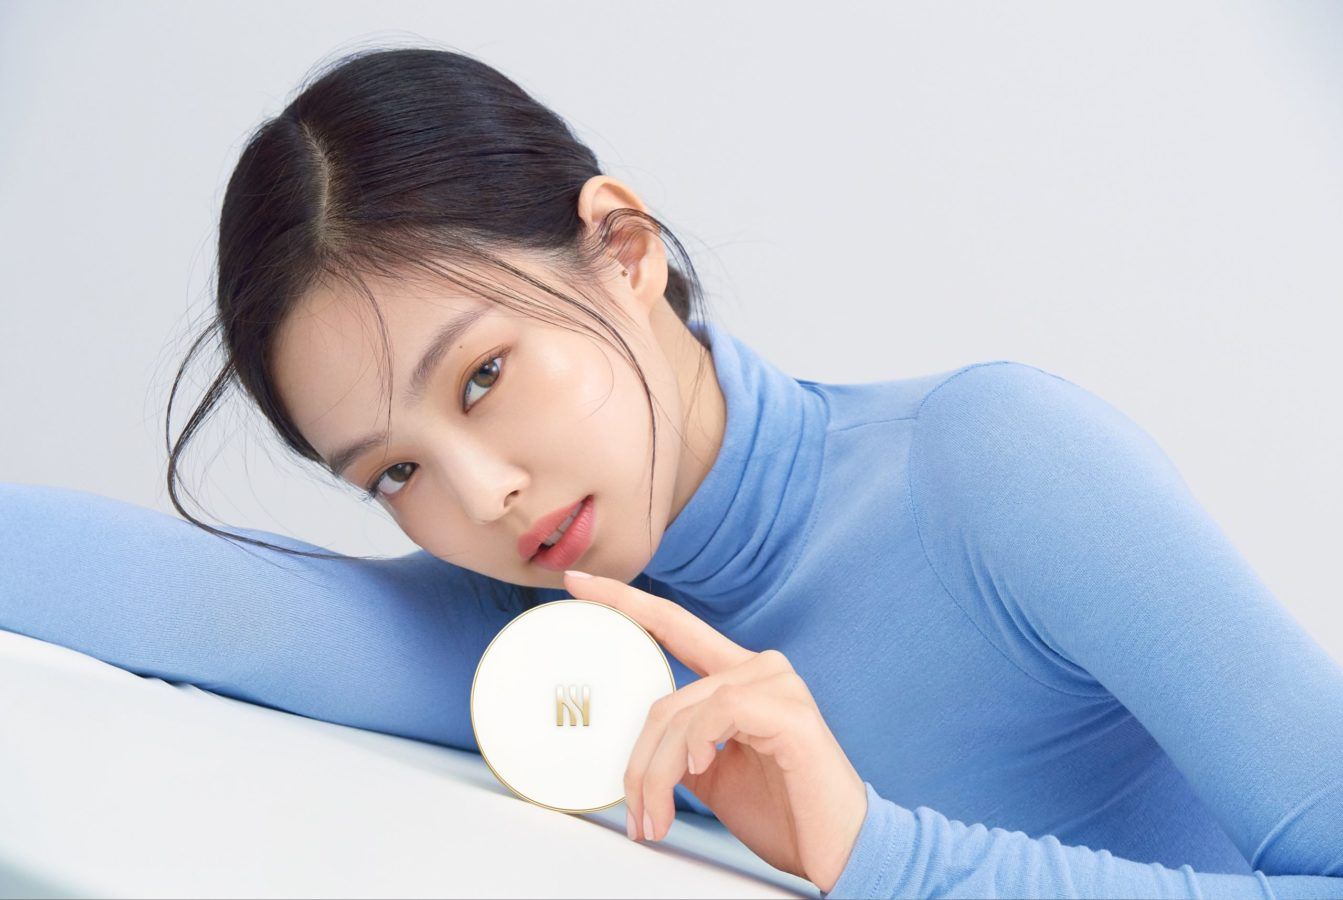 10 Korean beauty products Korean celebrities actually use